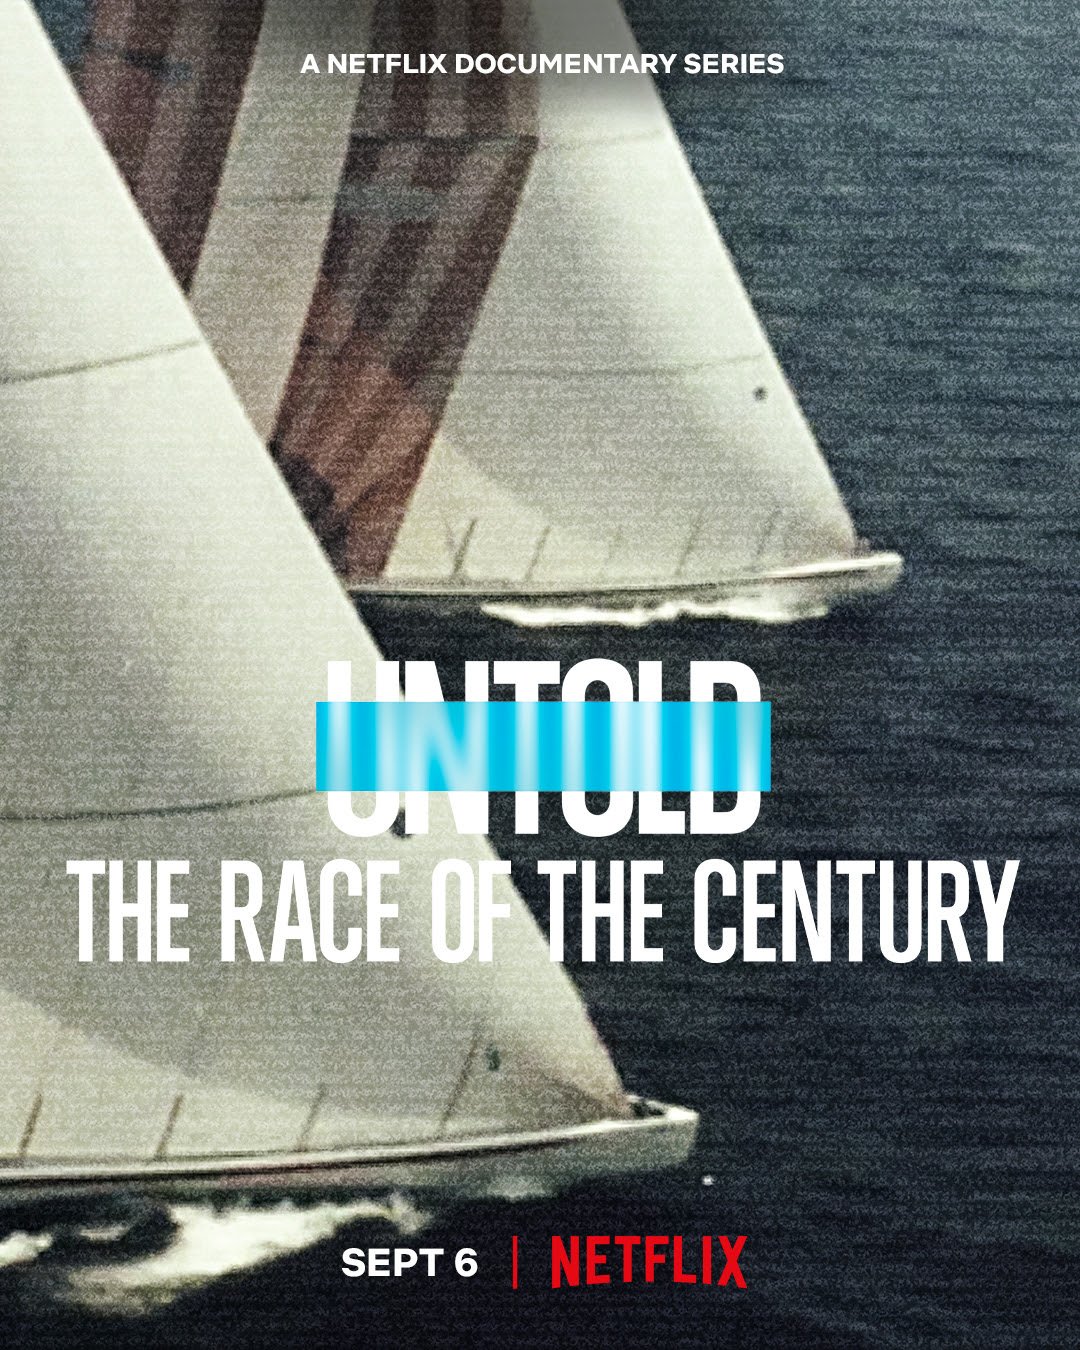 Is Untold The Race of the Century (2022) available on Netflix